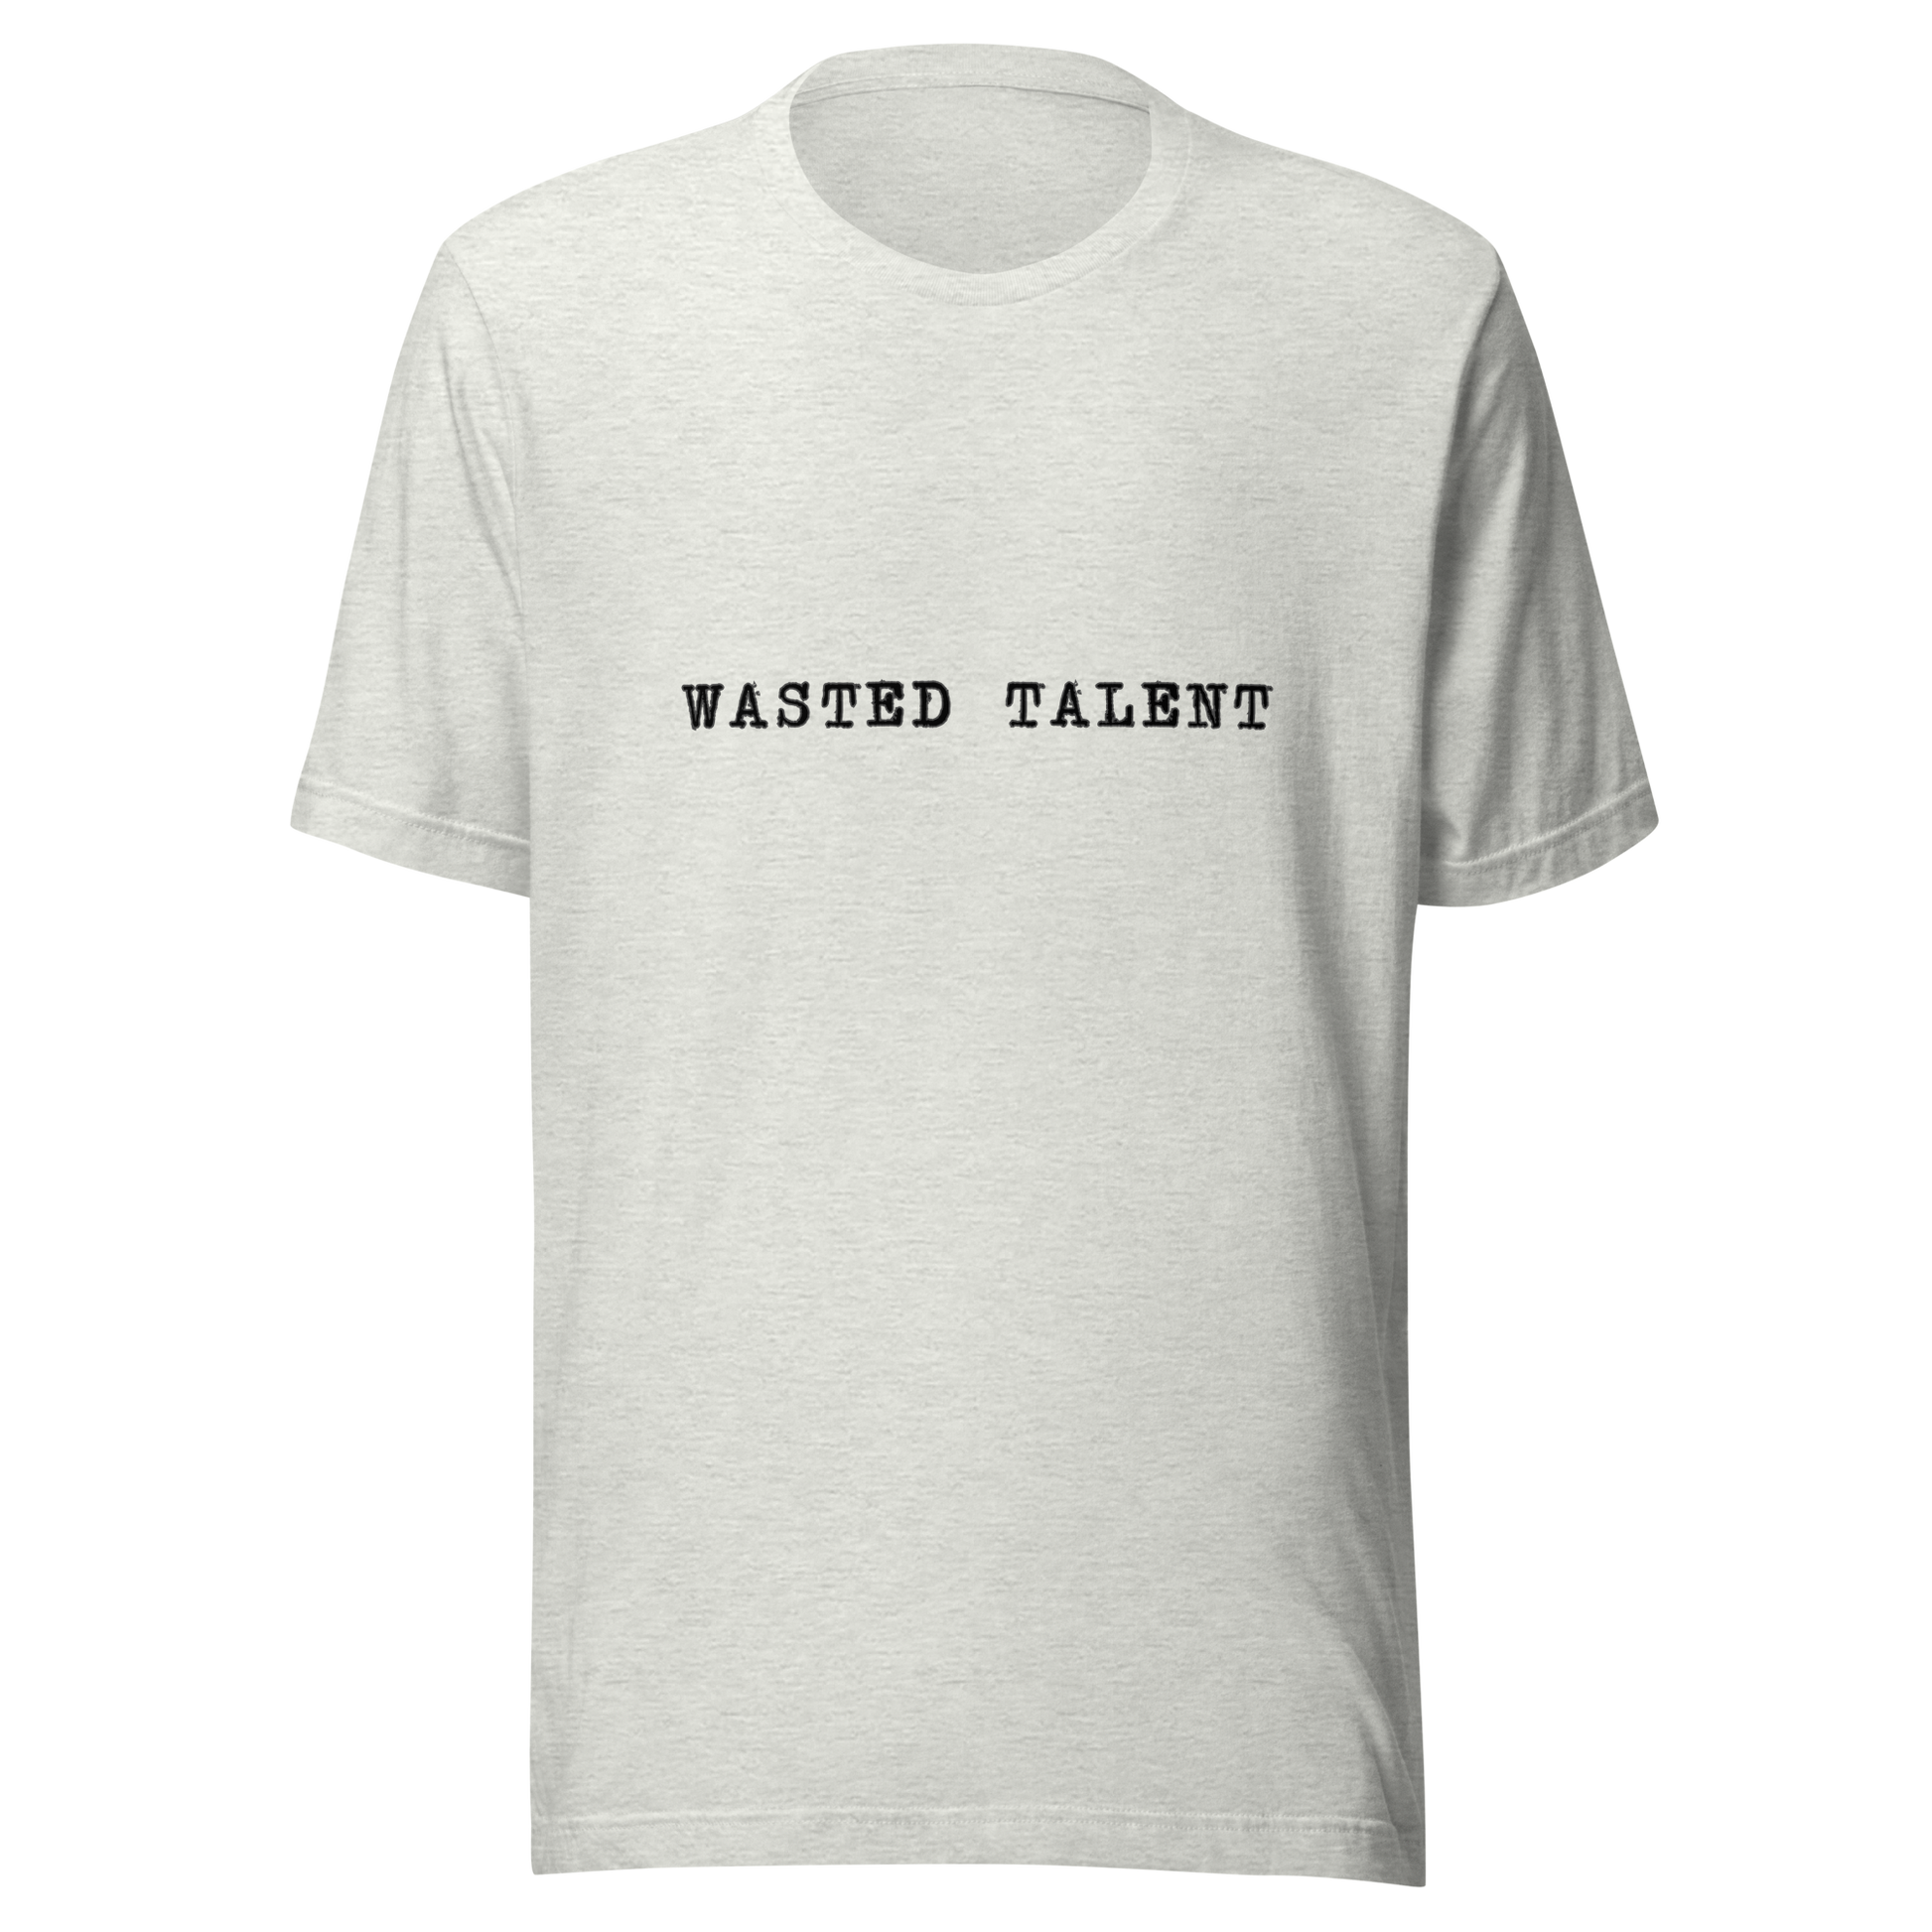 wasted talent t-shirt in white - gaslit apparel